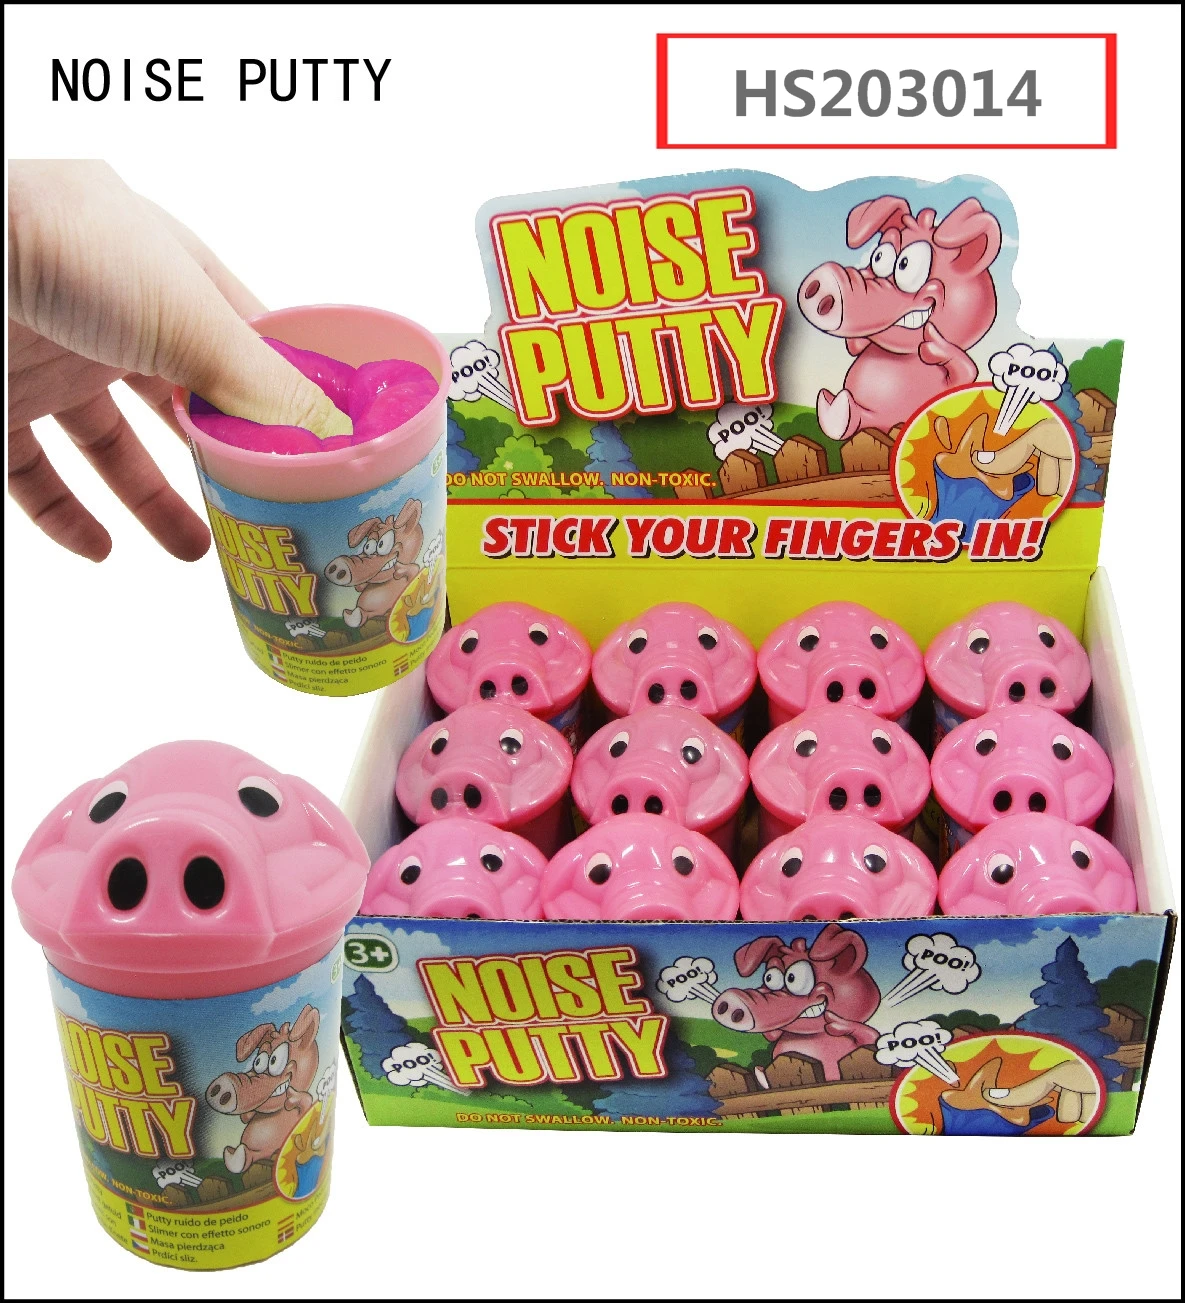 HS203014, Huwsin Toys, Fart noise putty break wind noise putty toys funny putty slime